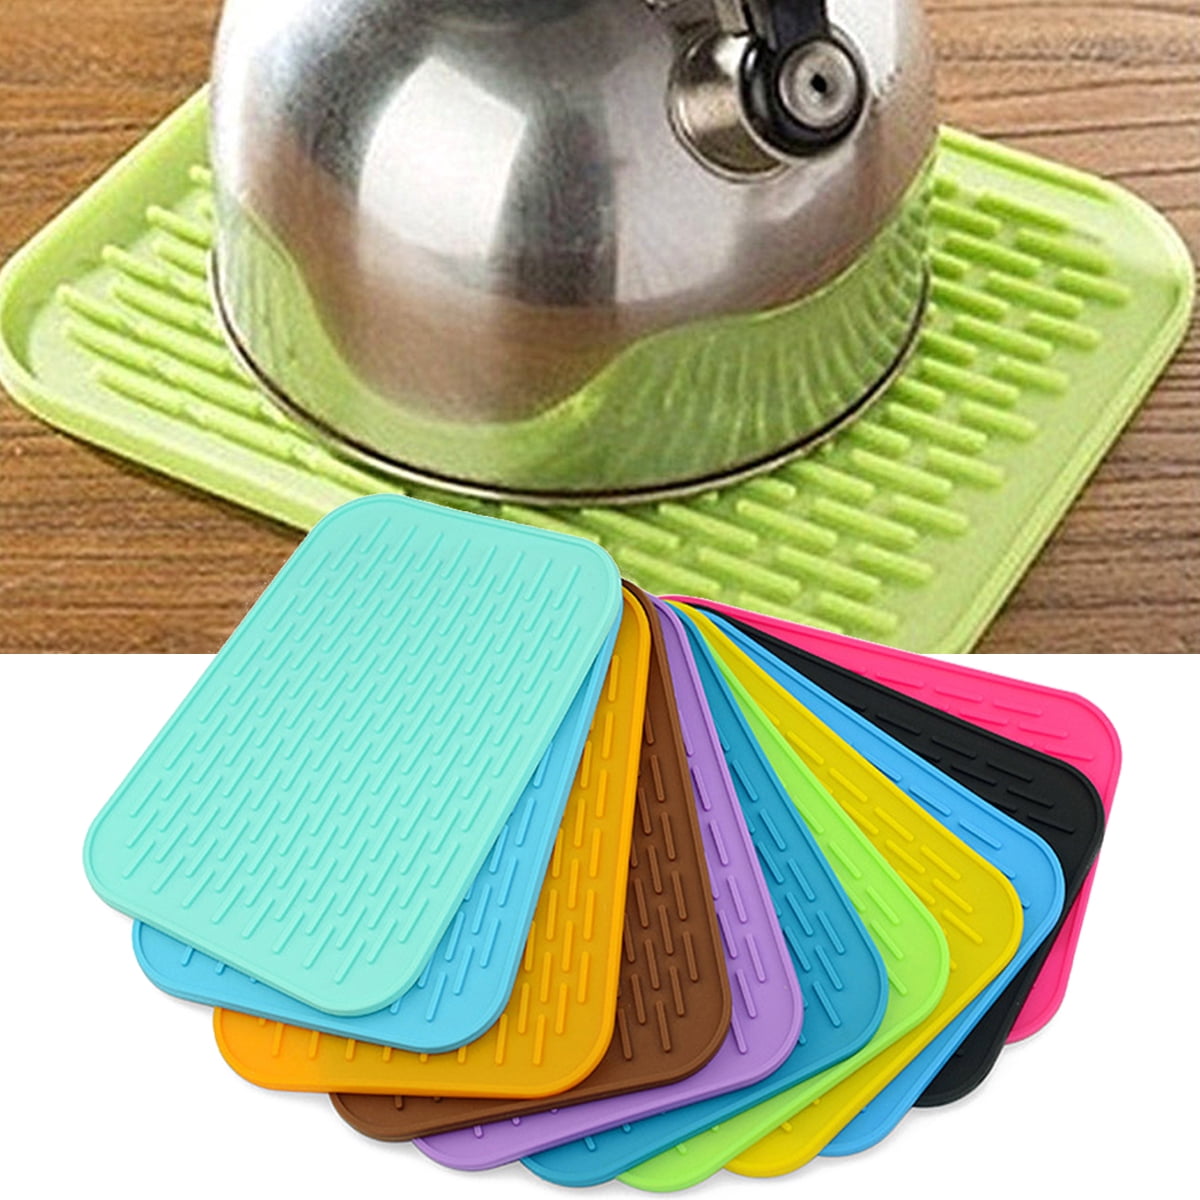 Silicone Trivet Mat Set - 4 Pack (7”x7”)  Silicone trivet, Silicone pot  holders, Silicone hot pads